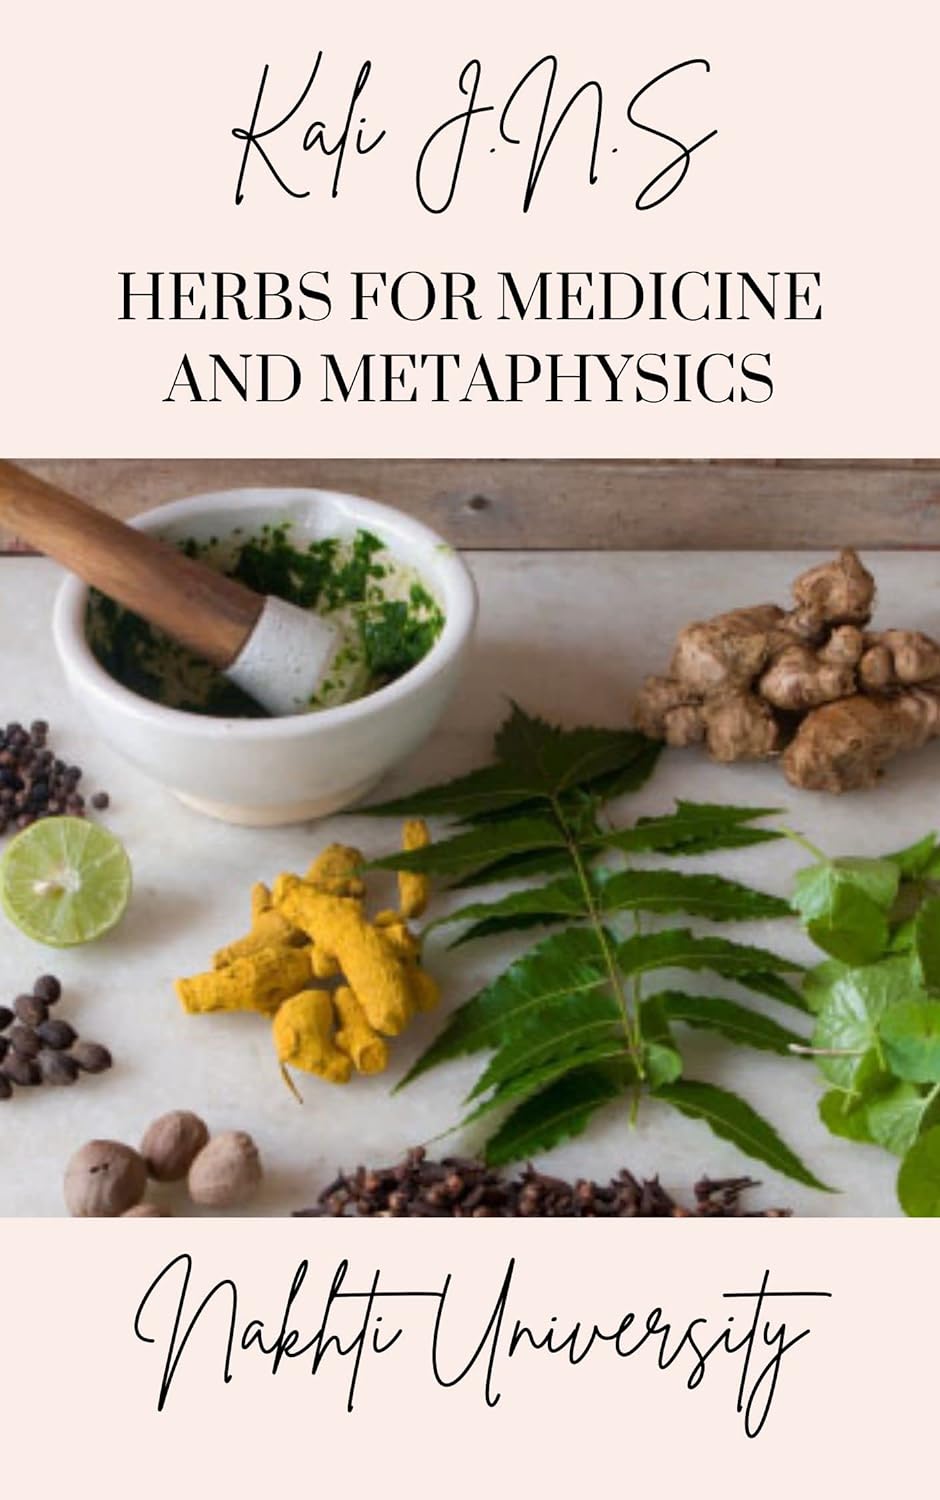 Herbs for Medicine and Metaphysics